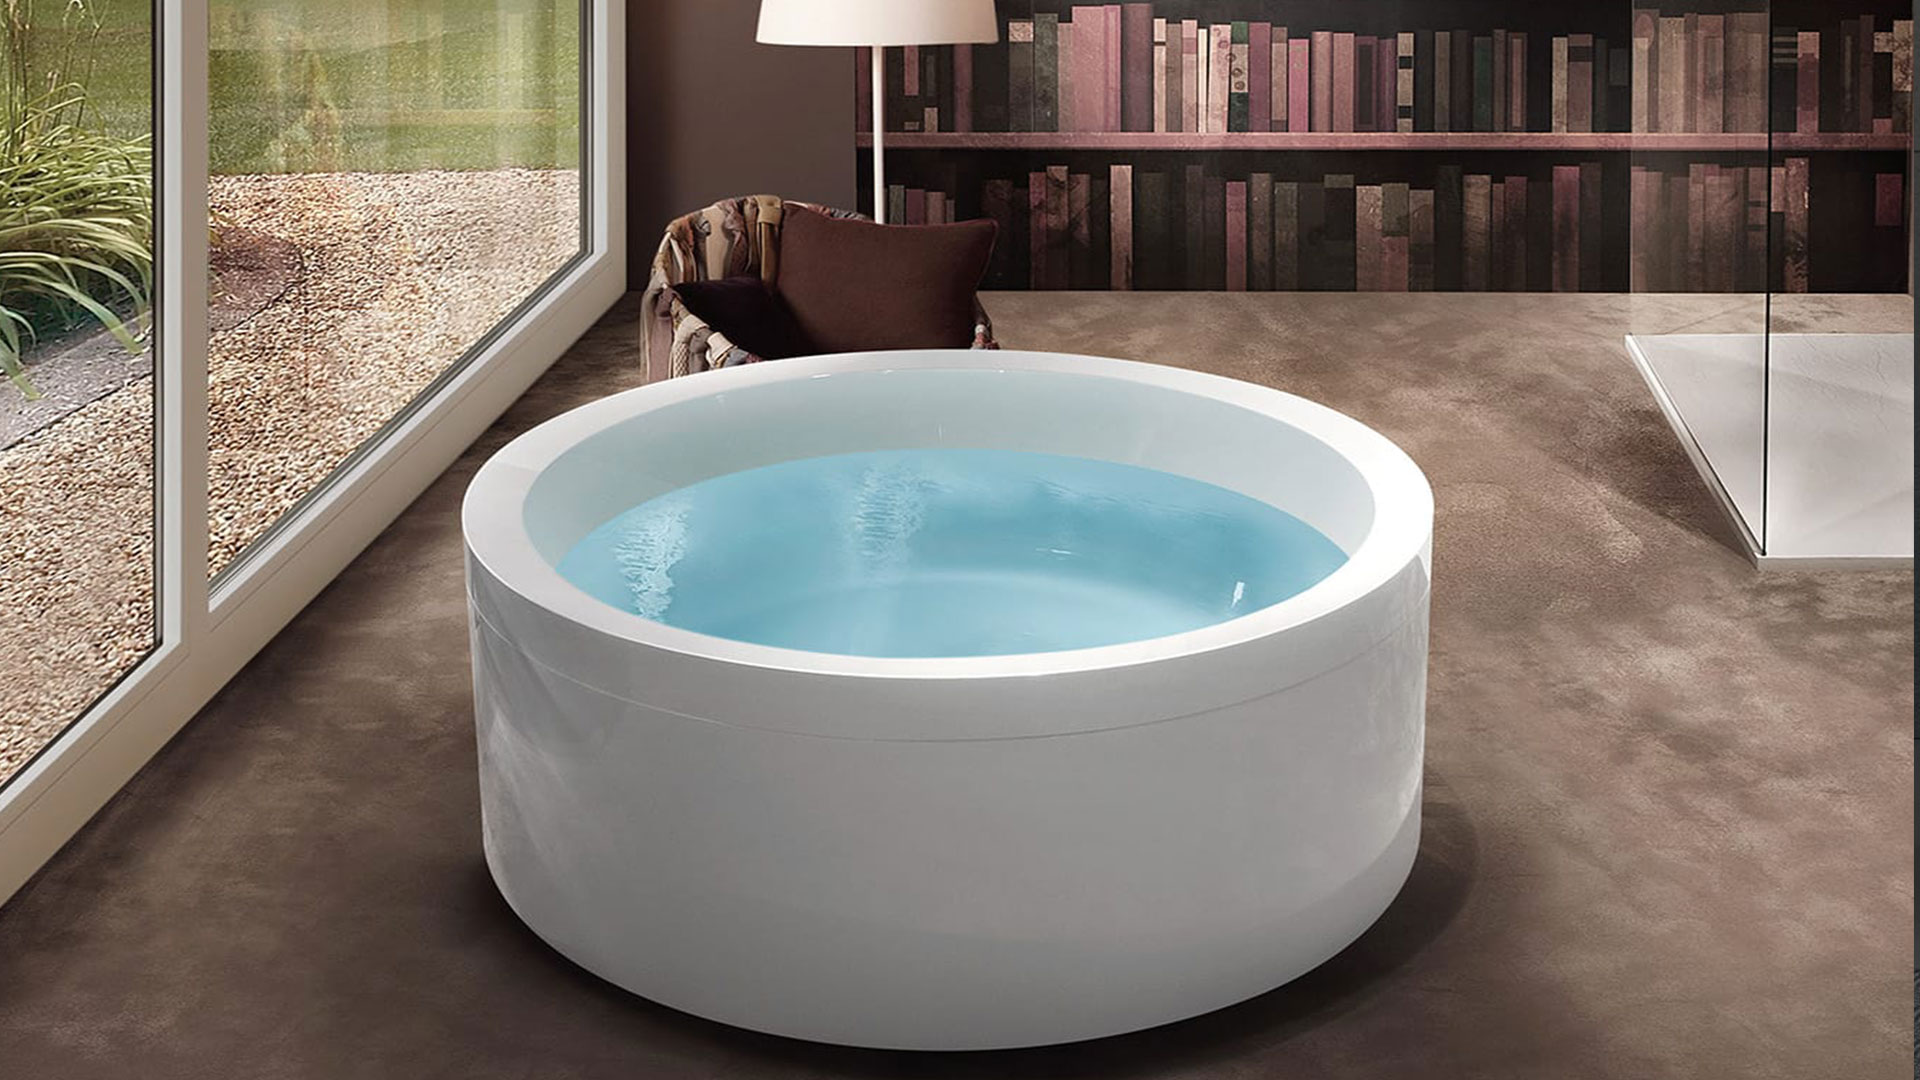 Blog IDW - 10 bathtubs which you will love!